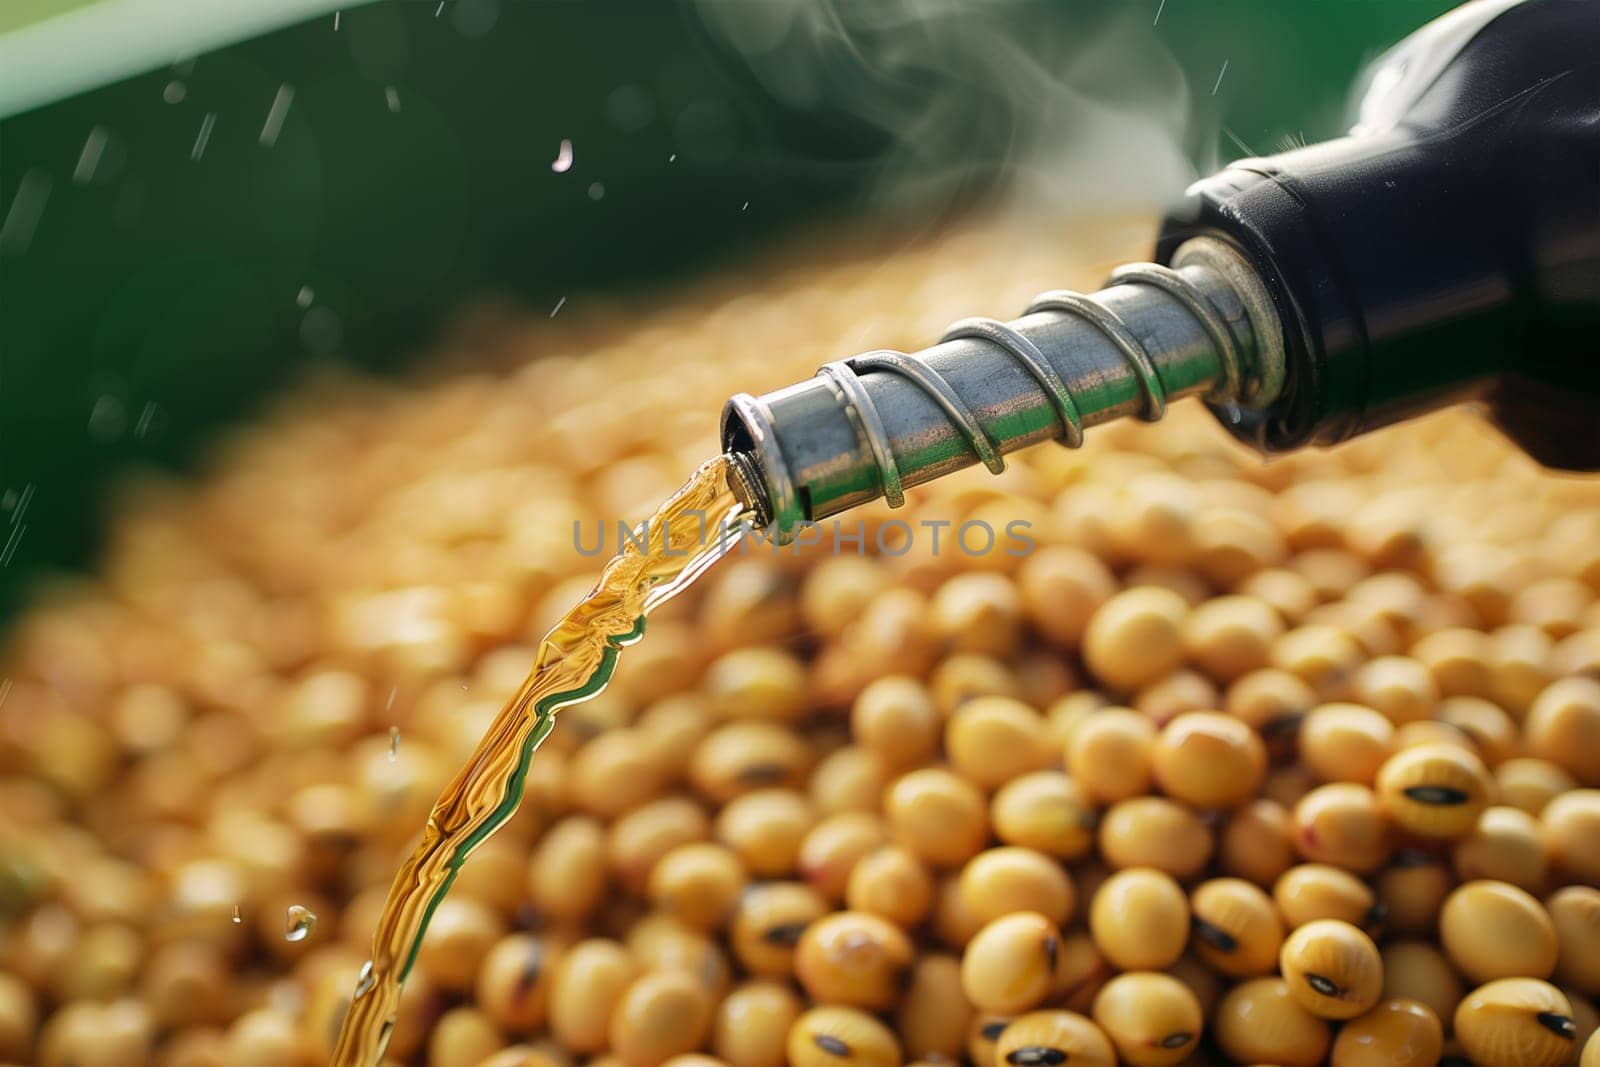 Close-Up View of Soybean Oil Being Poured From a Bottle Onto a Heap of Soybeans by Sd28DimoN_1976